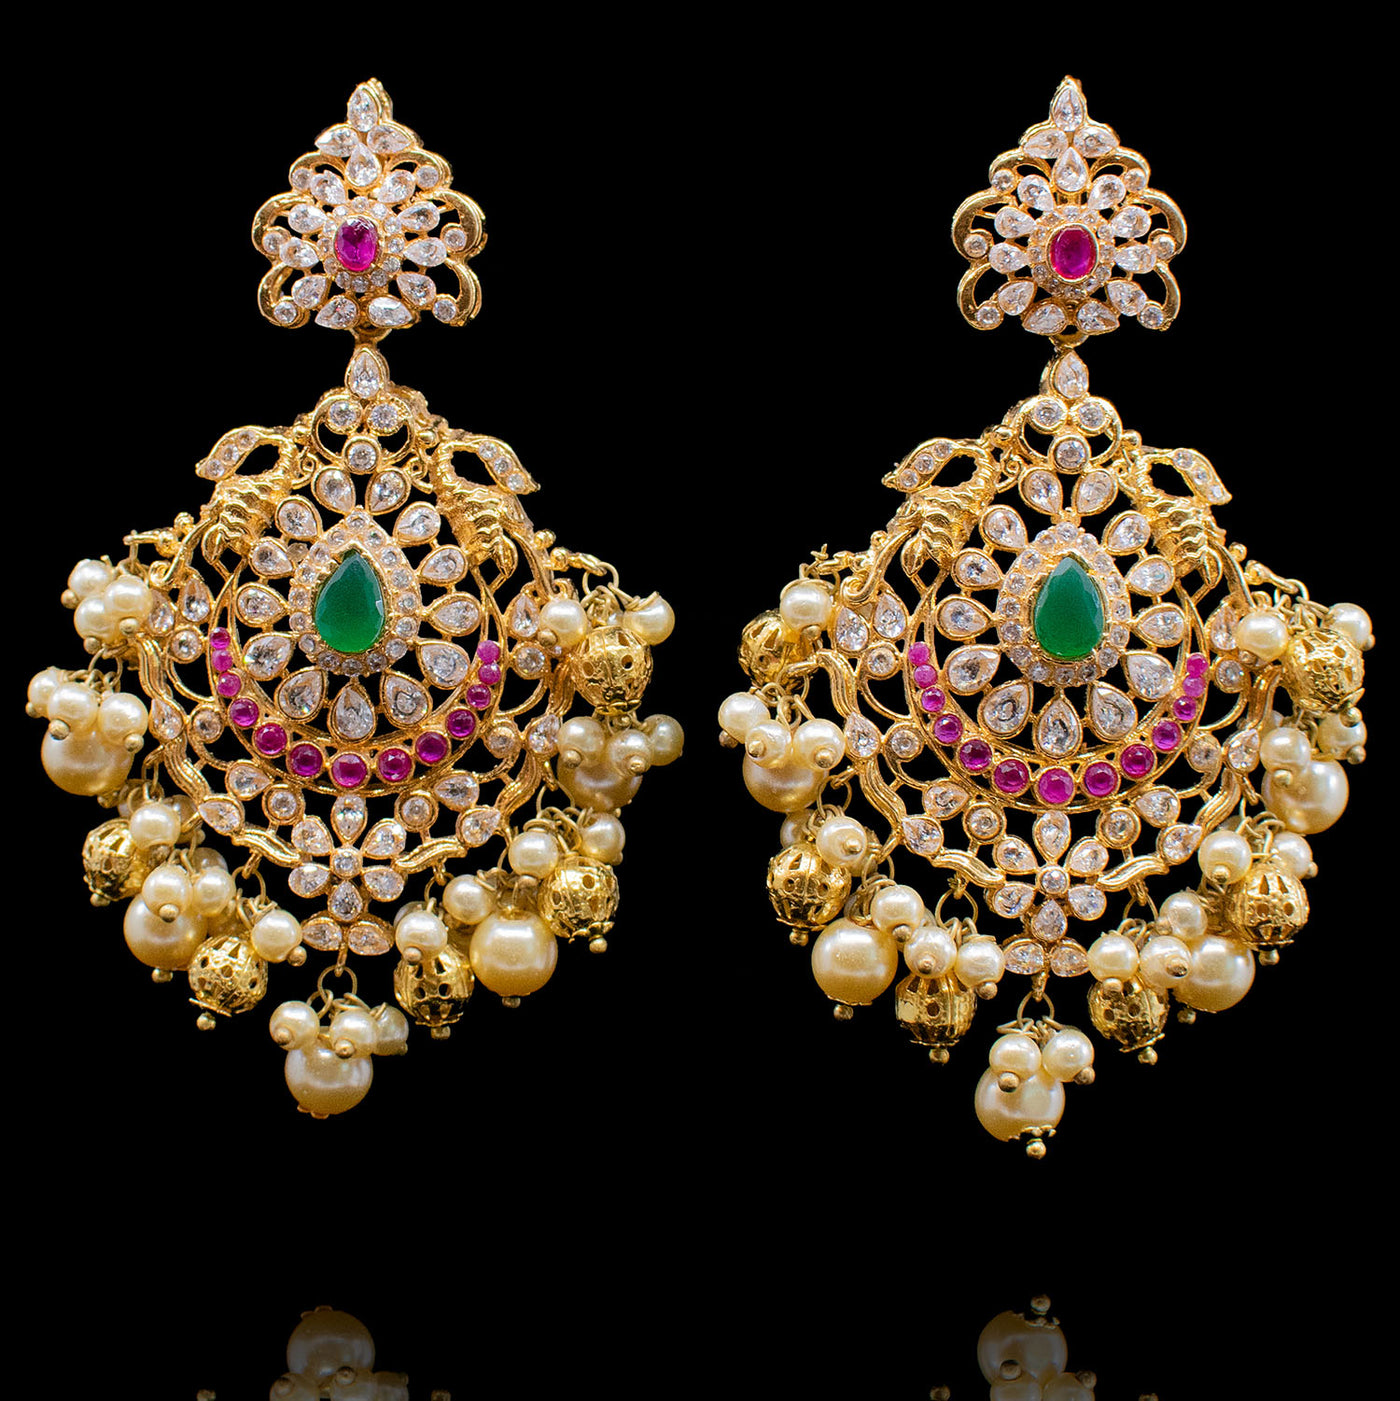 Selwa Earrings - Available in 2 Sizes